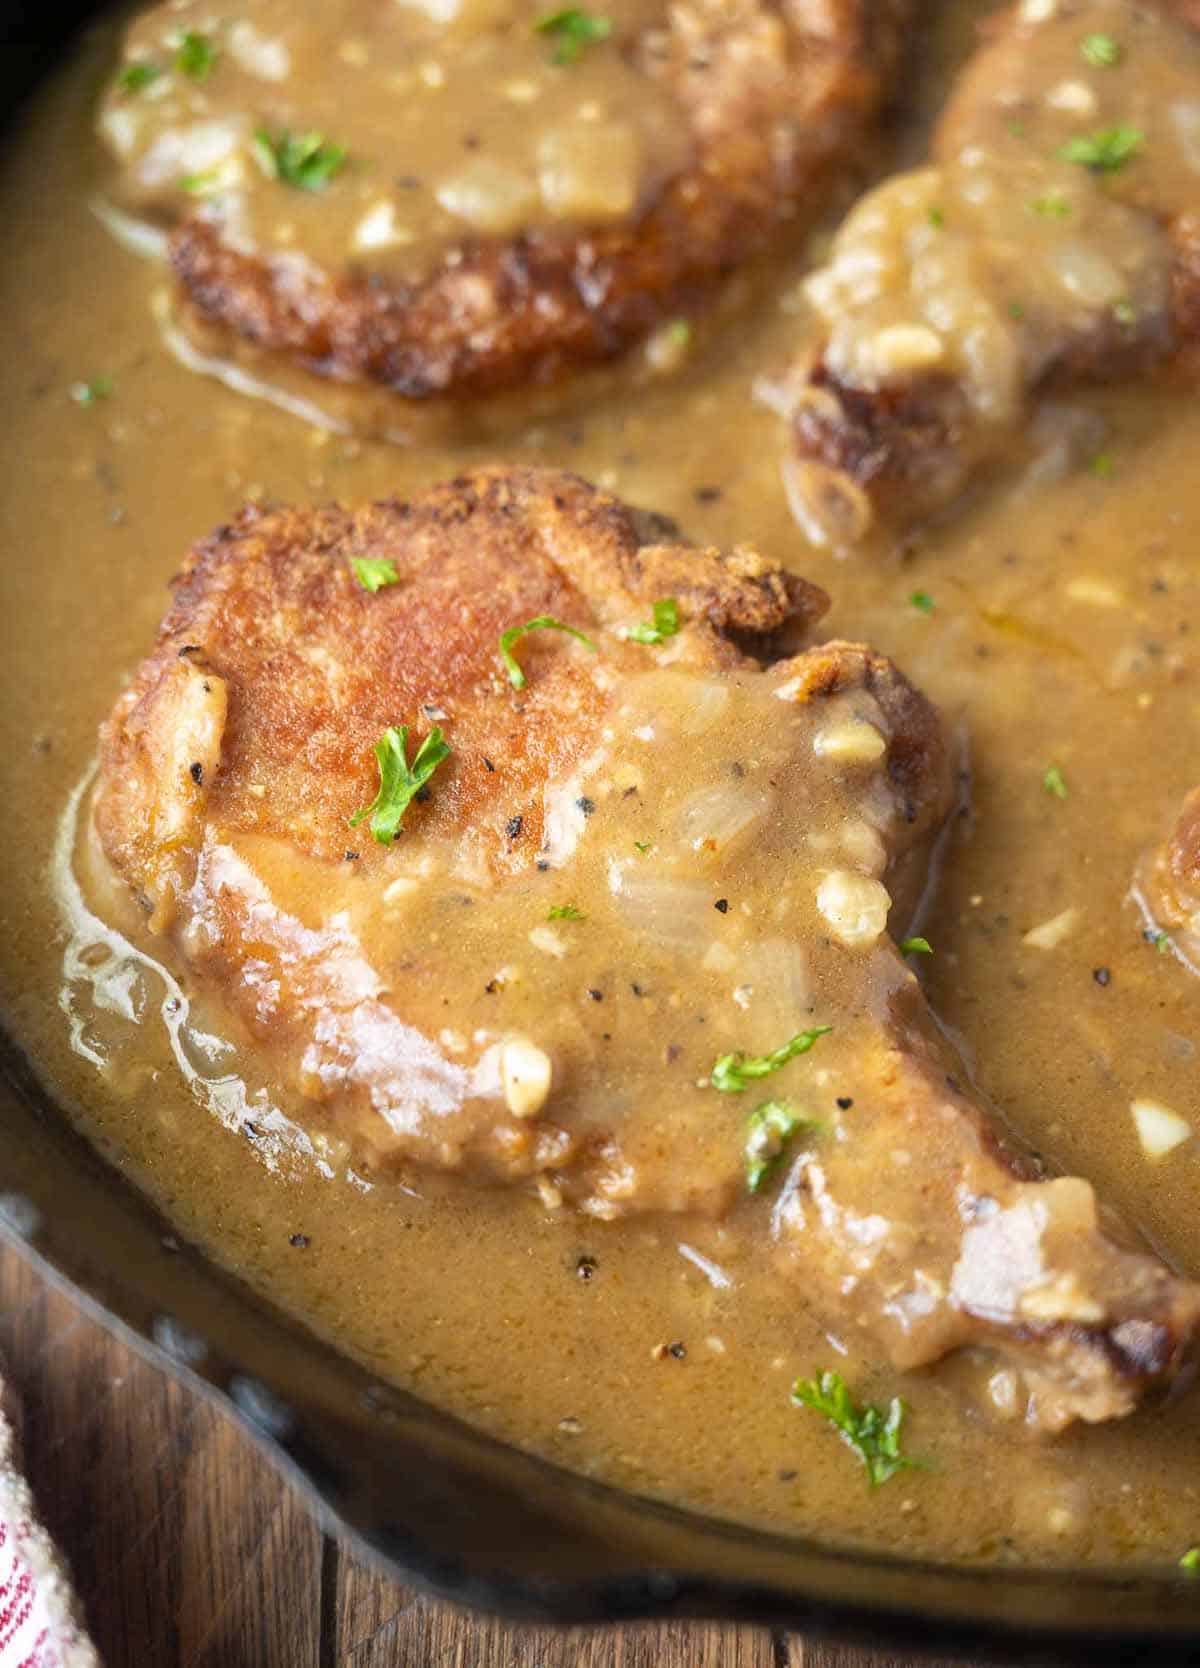 Pork chops smothered in a gravy in a skillet.